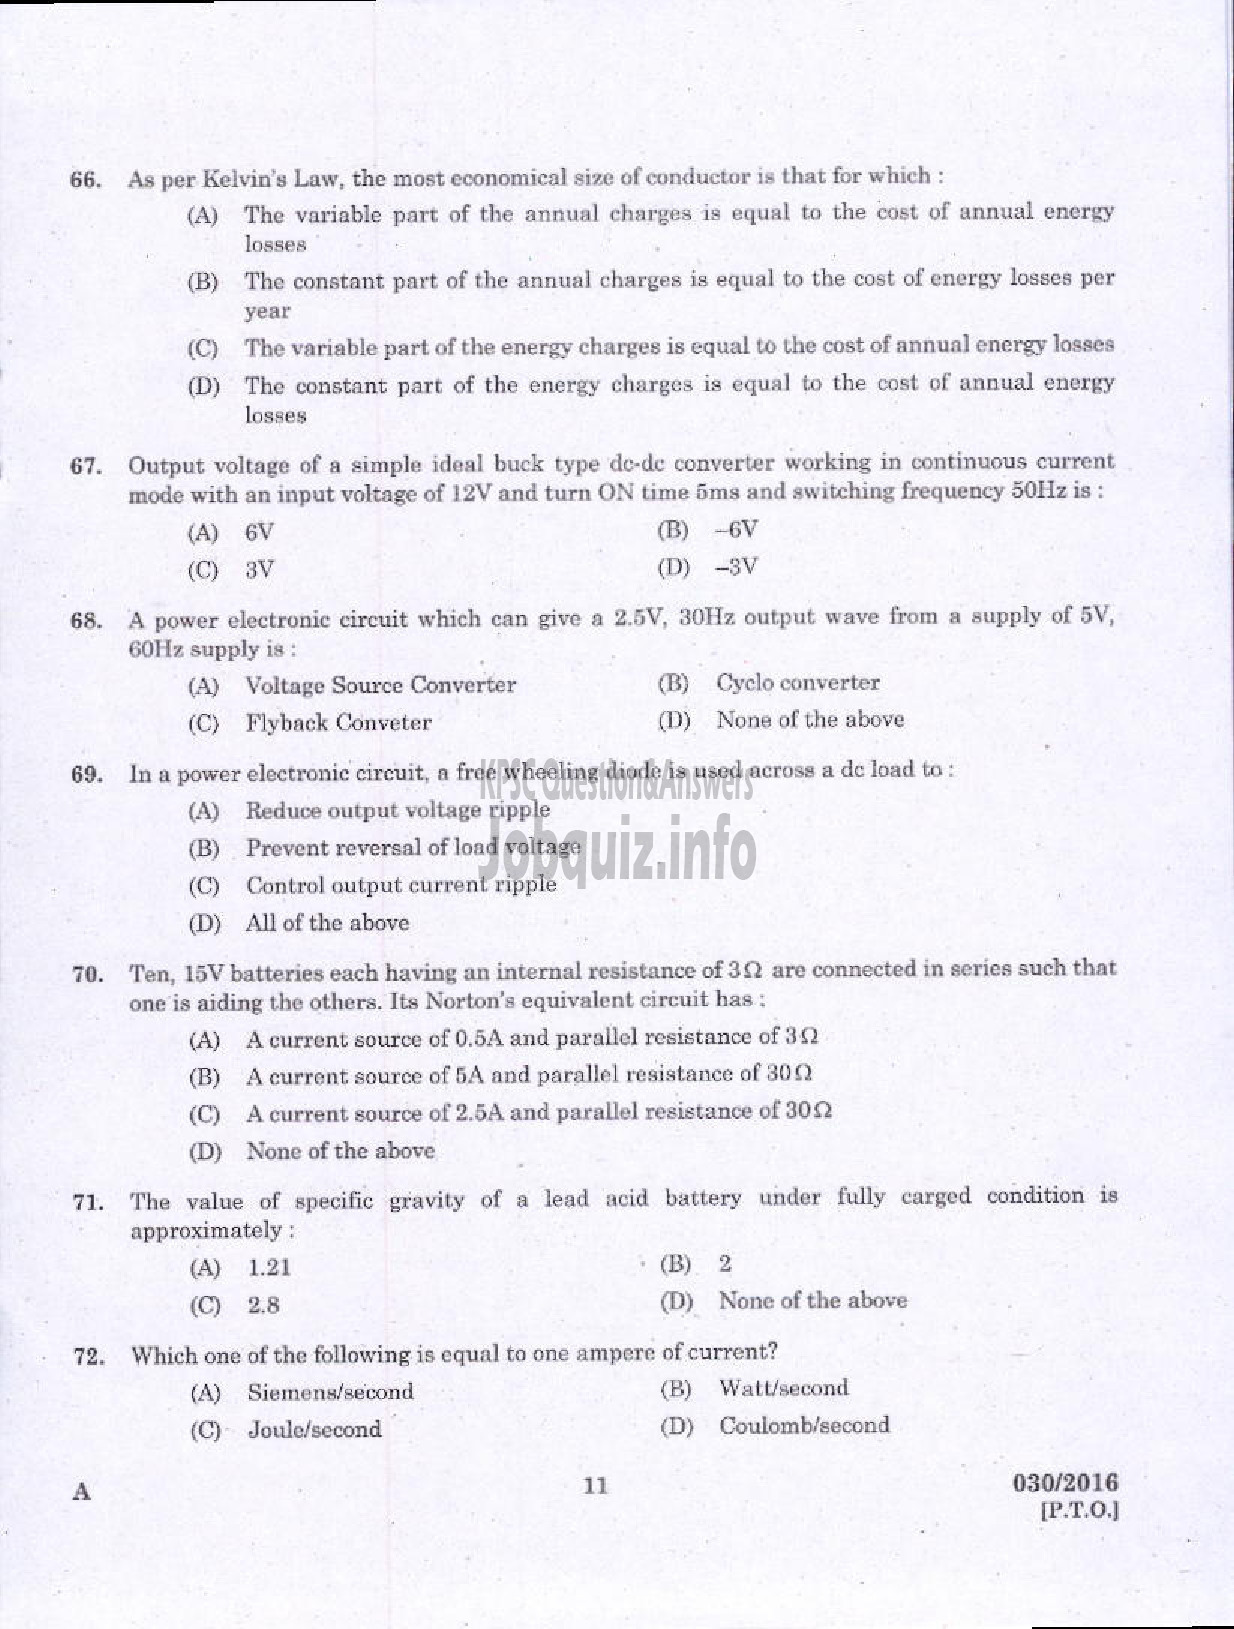 Kerala PSC Question Paper - ASSISTANT ENGINEER ELECTRICAL HARBOUR ENGINEERING-9